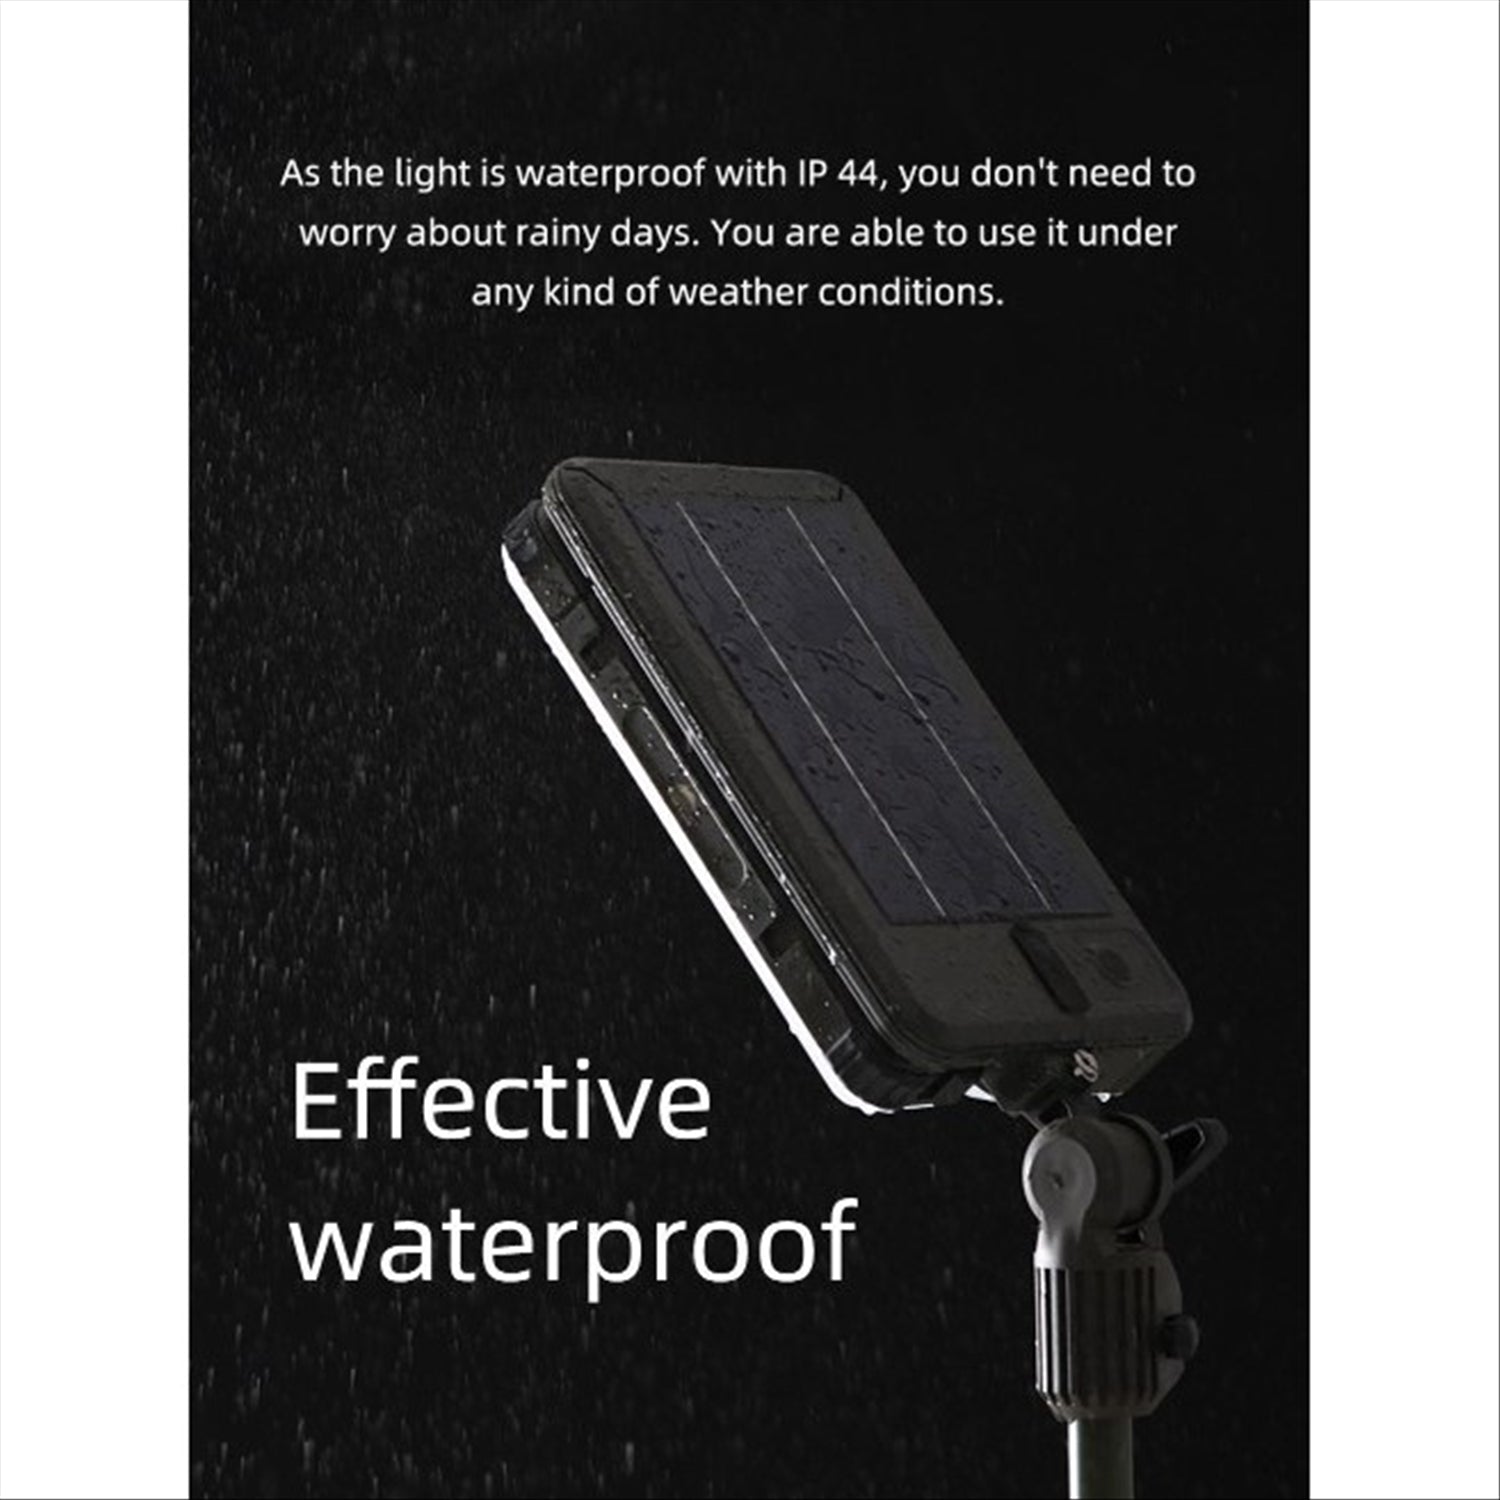 Wild Land Wild Land Galaxy LED Solar Powered Lights with Tripod Stand